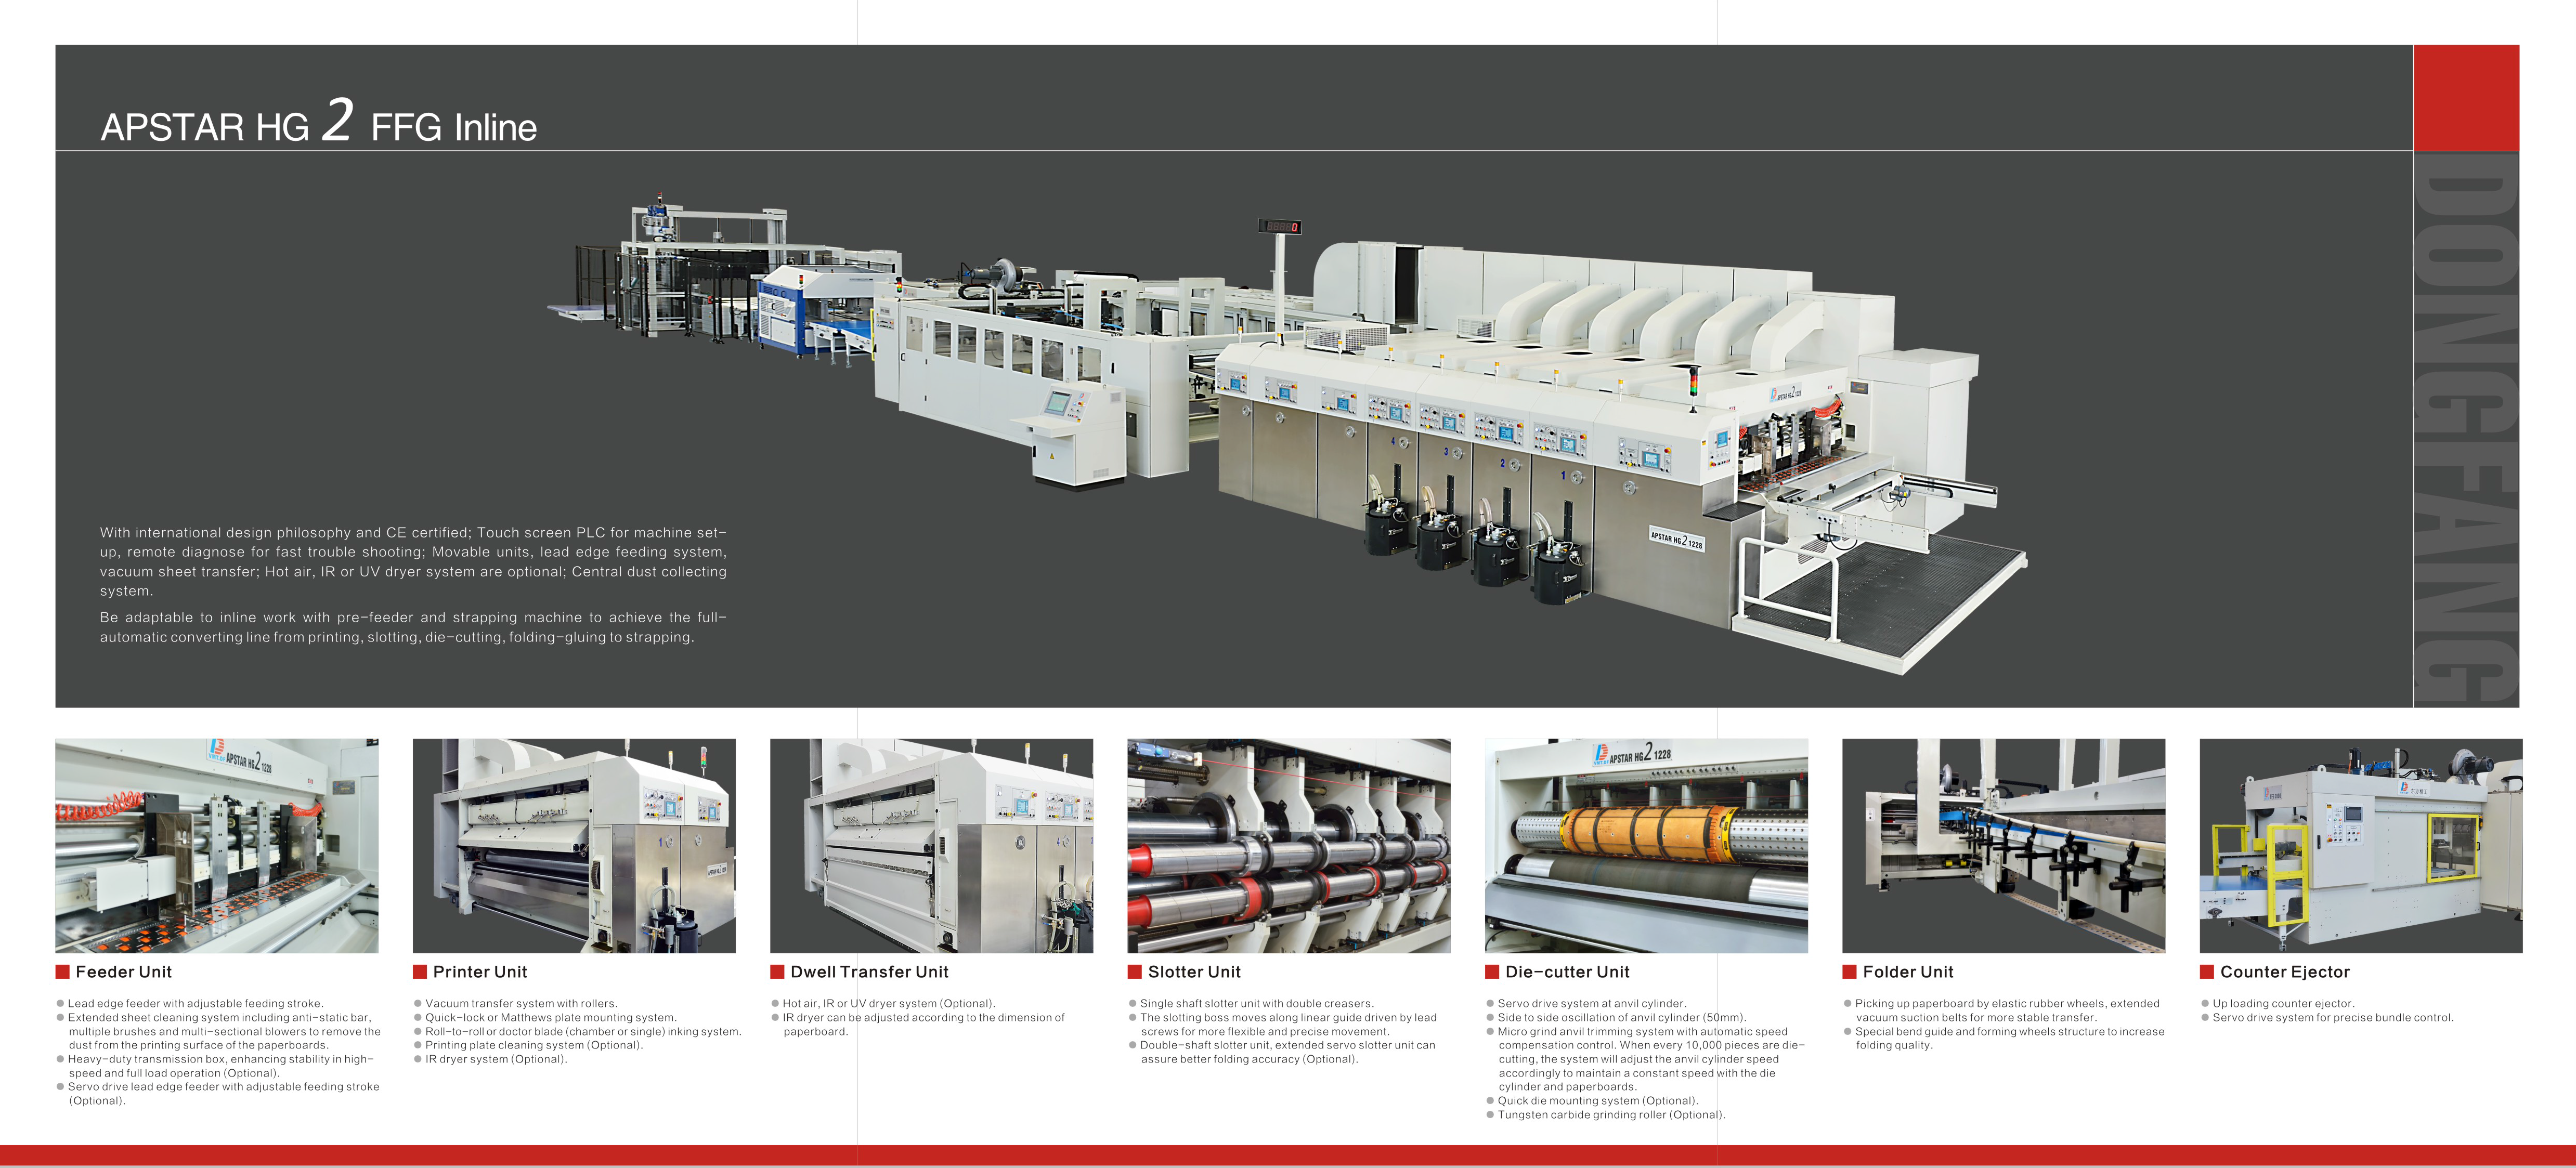 Learn more about the Apstar HG2 Flexo Folder Gluer Inline in the Dong Fang brochure.